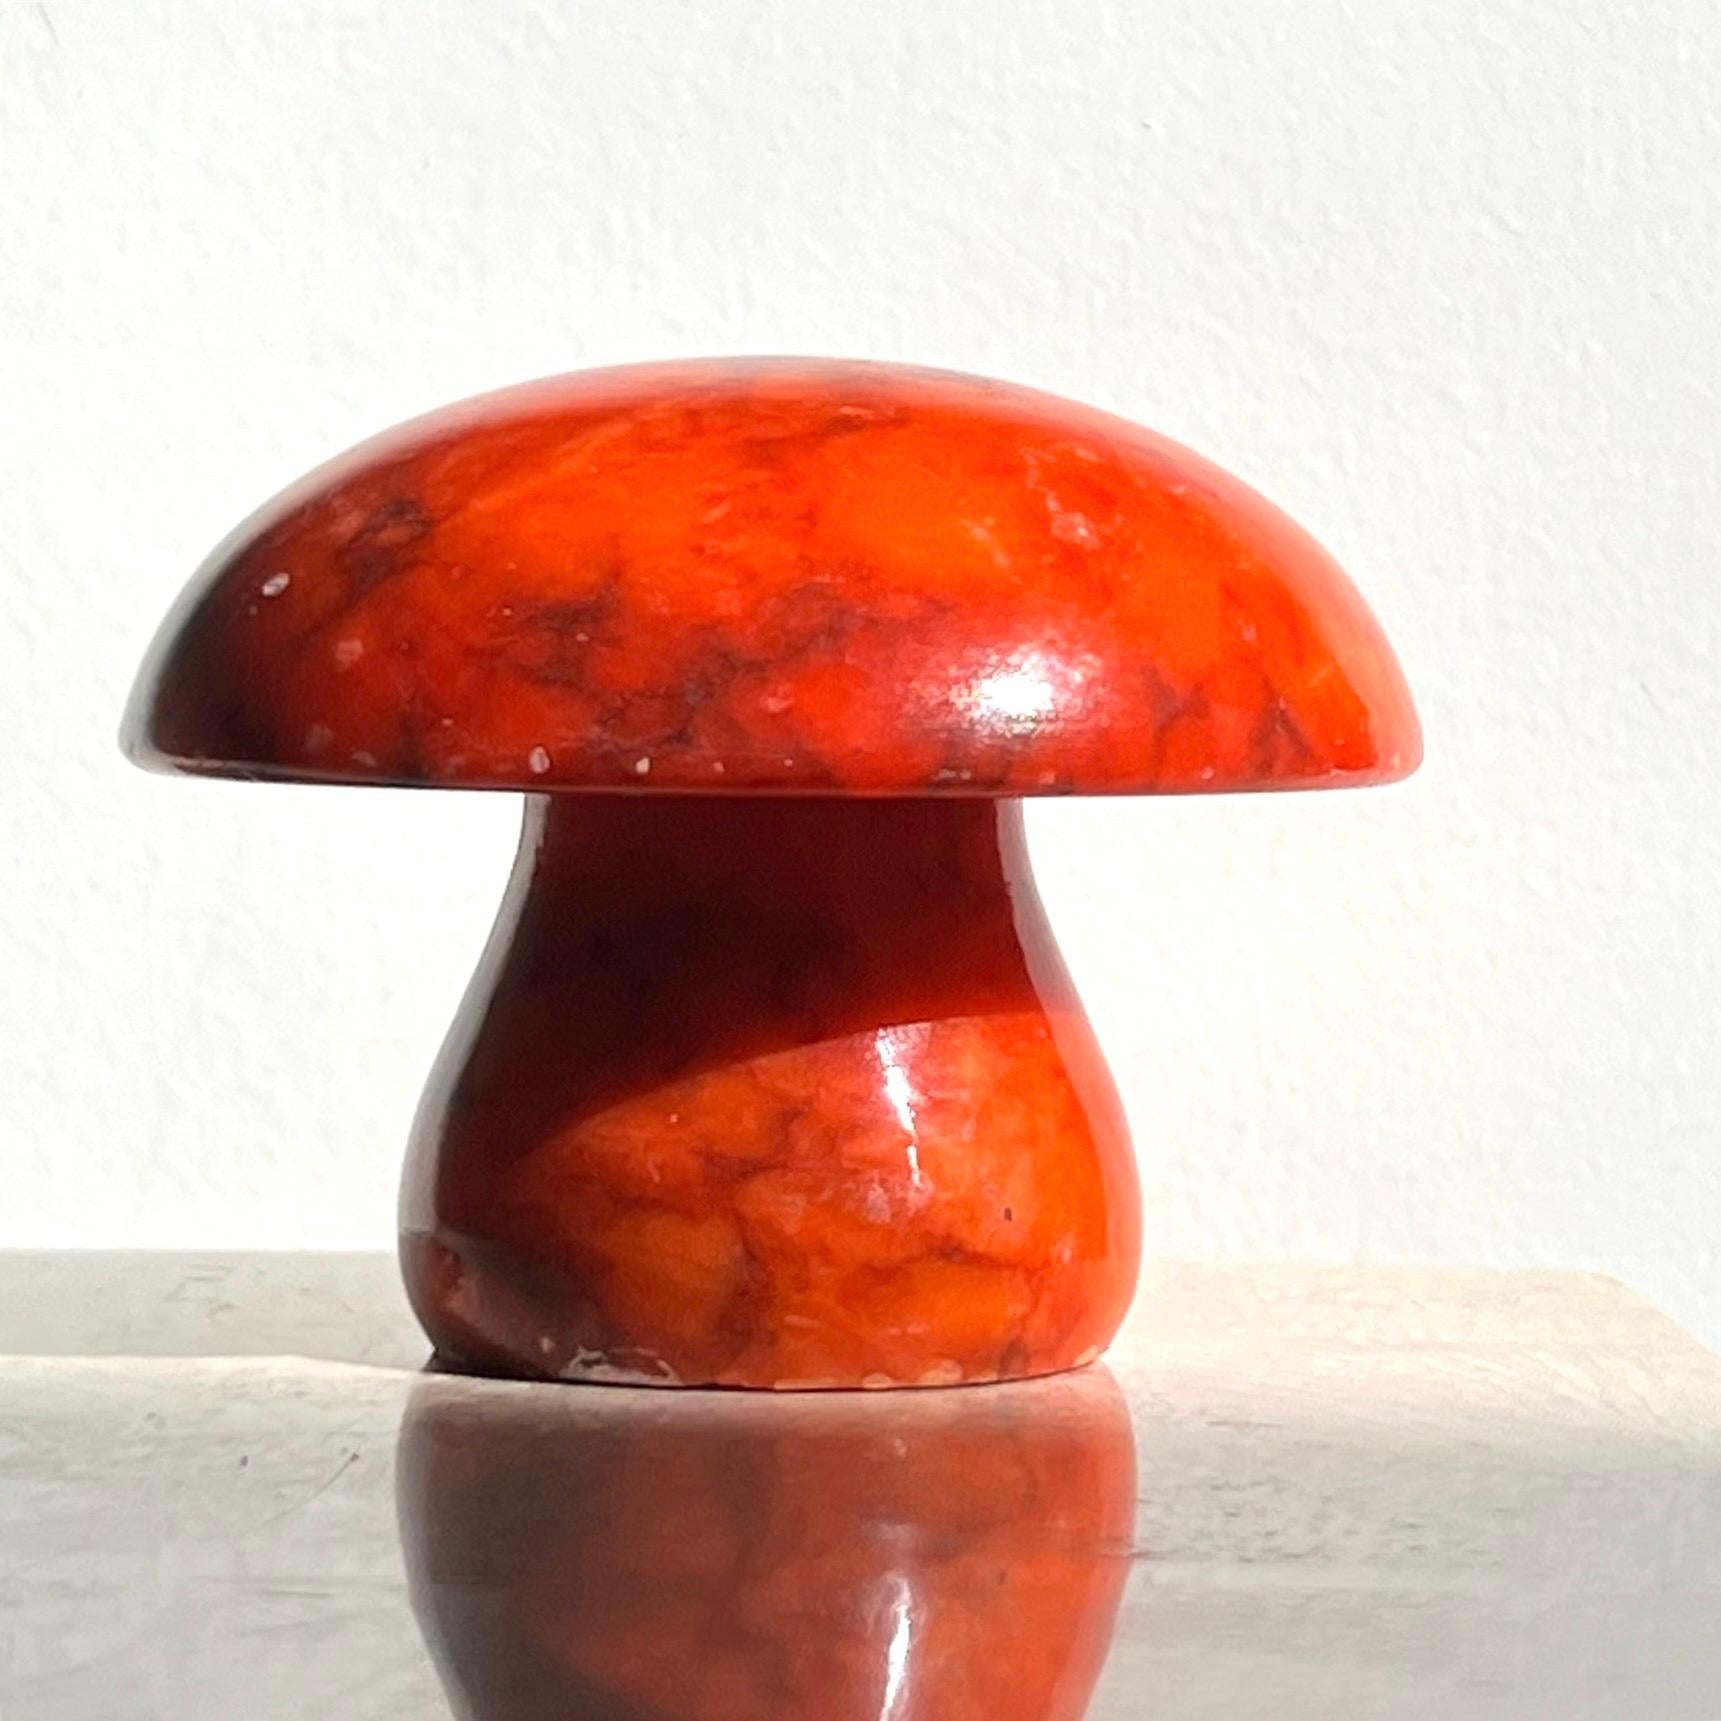 A vintage Italian marble mushroom objet d’art / paperweight in brilliant fiery coral red, circa 1960s. Hand-carved of genuine alabaster stone - original sticker intact. Some signs of age but no glaring flaws. Pick up in central west Los Angeles or